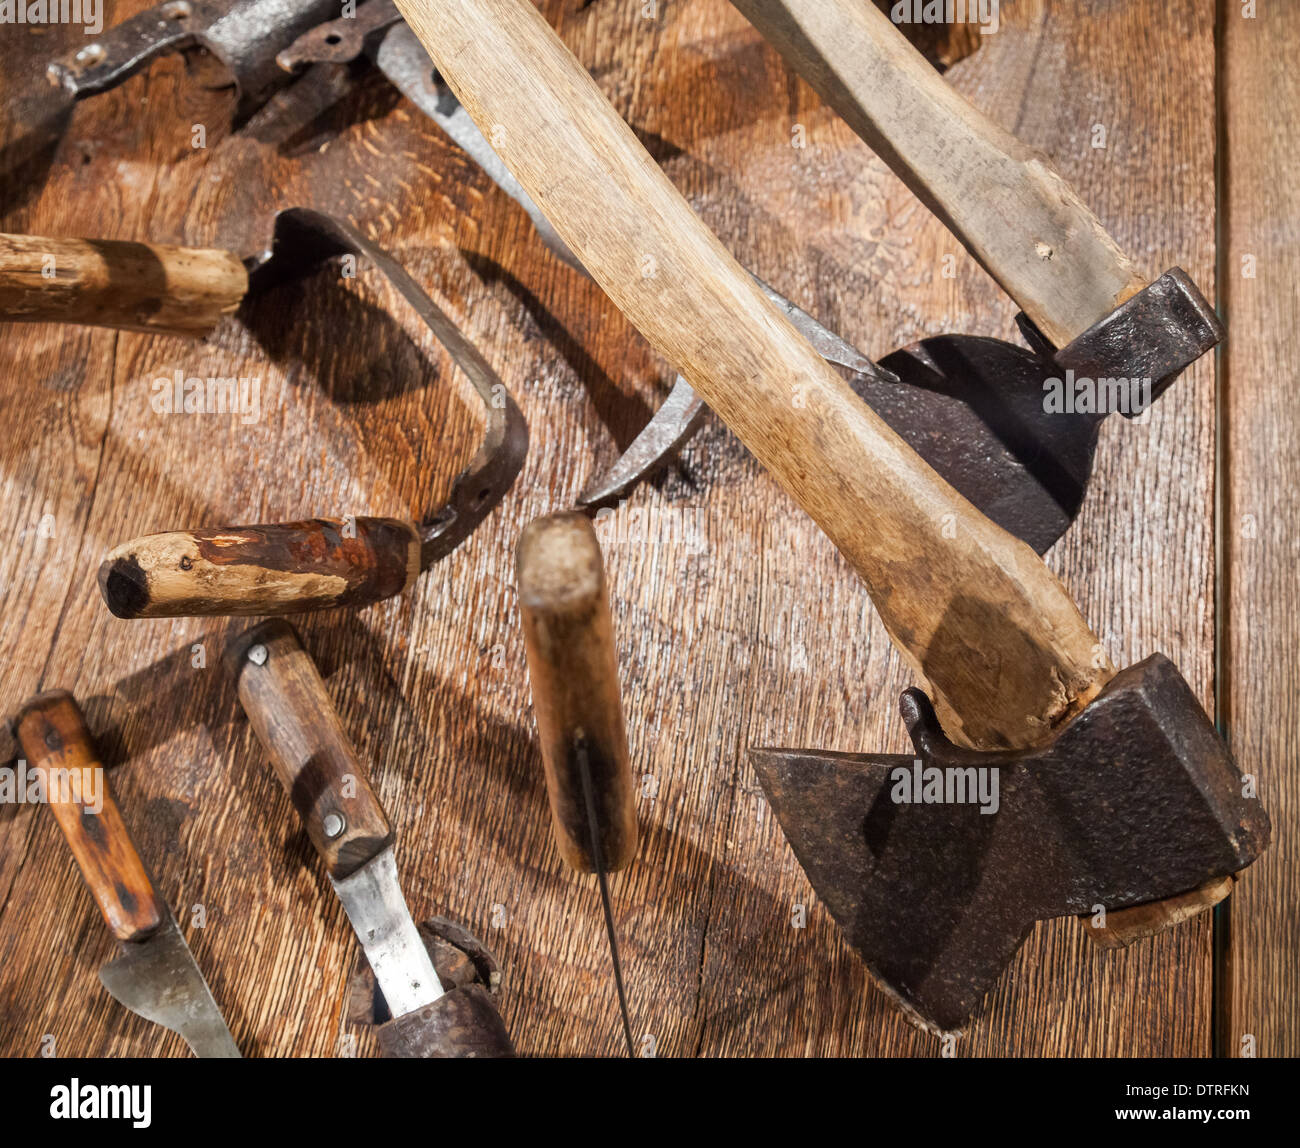 Group of different old Russian tools for woodworking Stock Photo